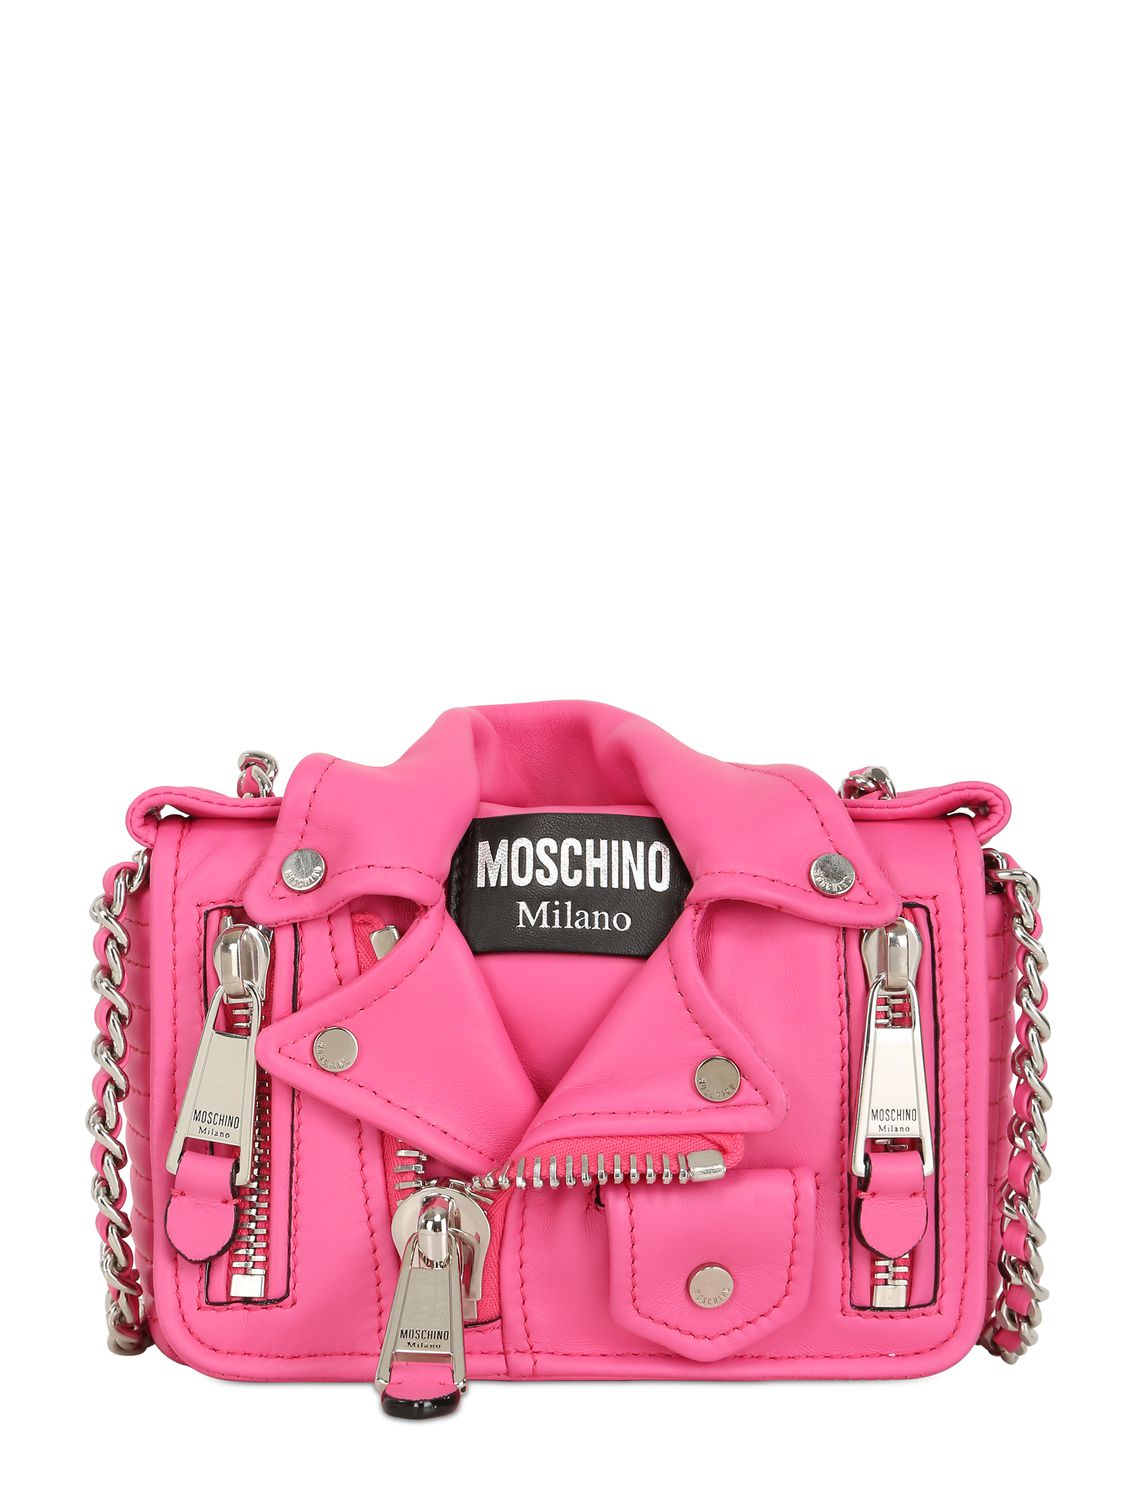 Moschino Small Biker Jacket Leather Shoulder Bag in Pink | Lyst